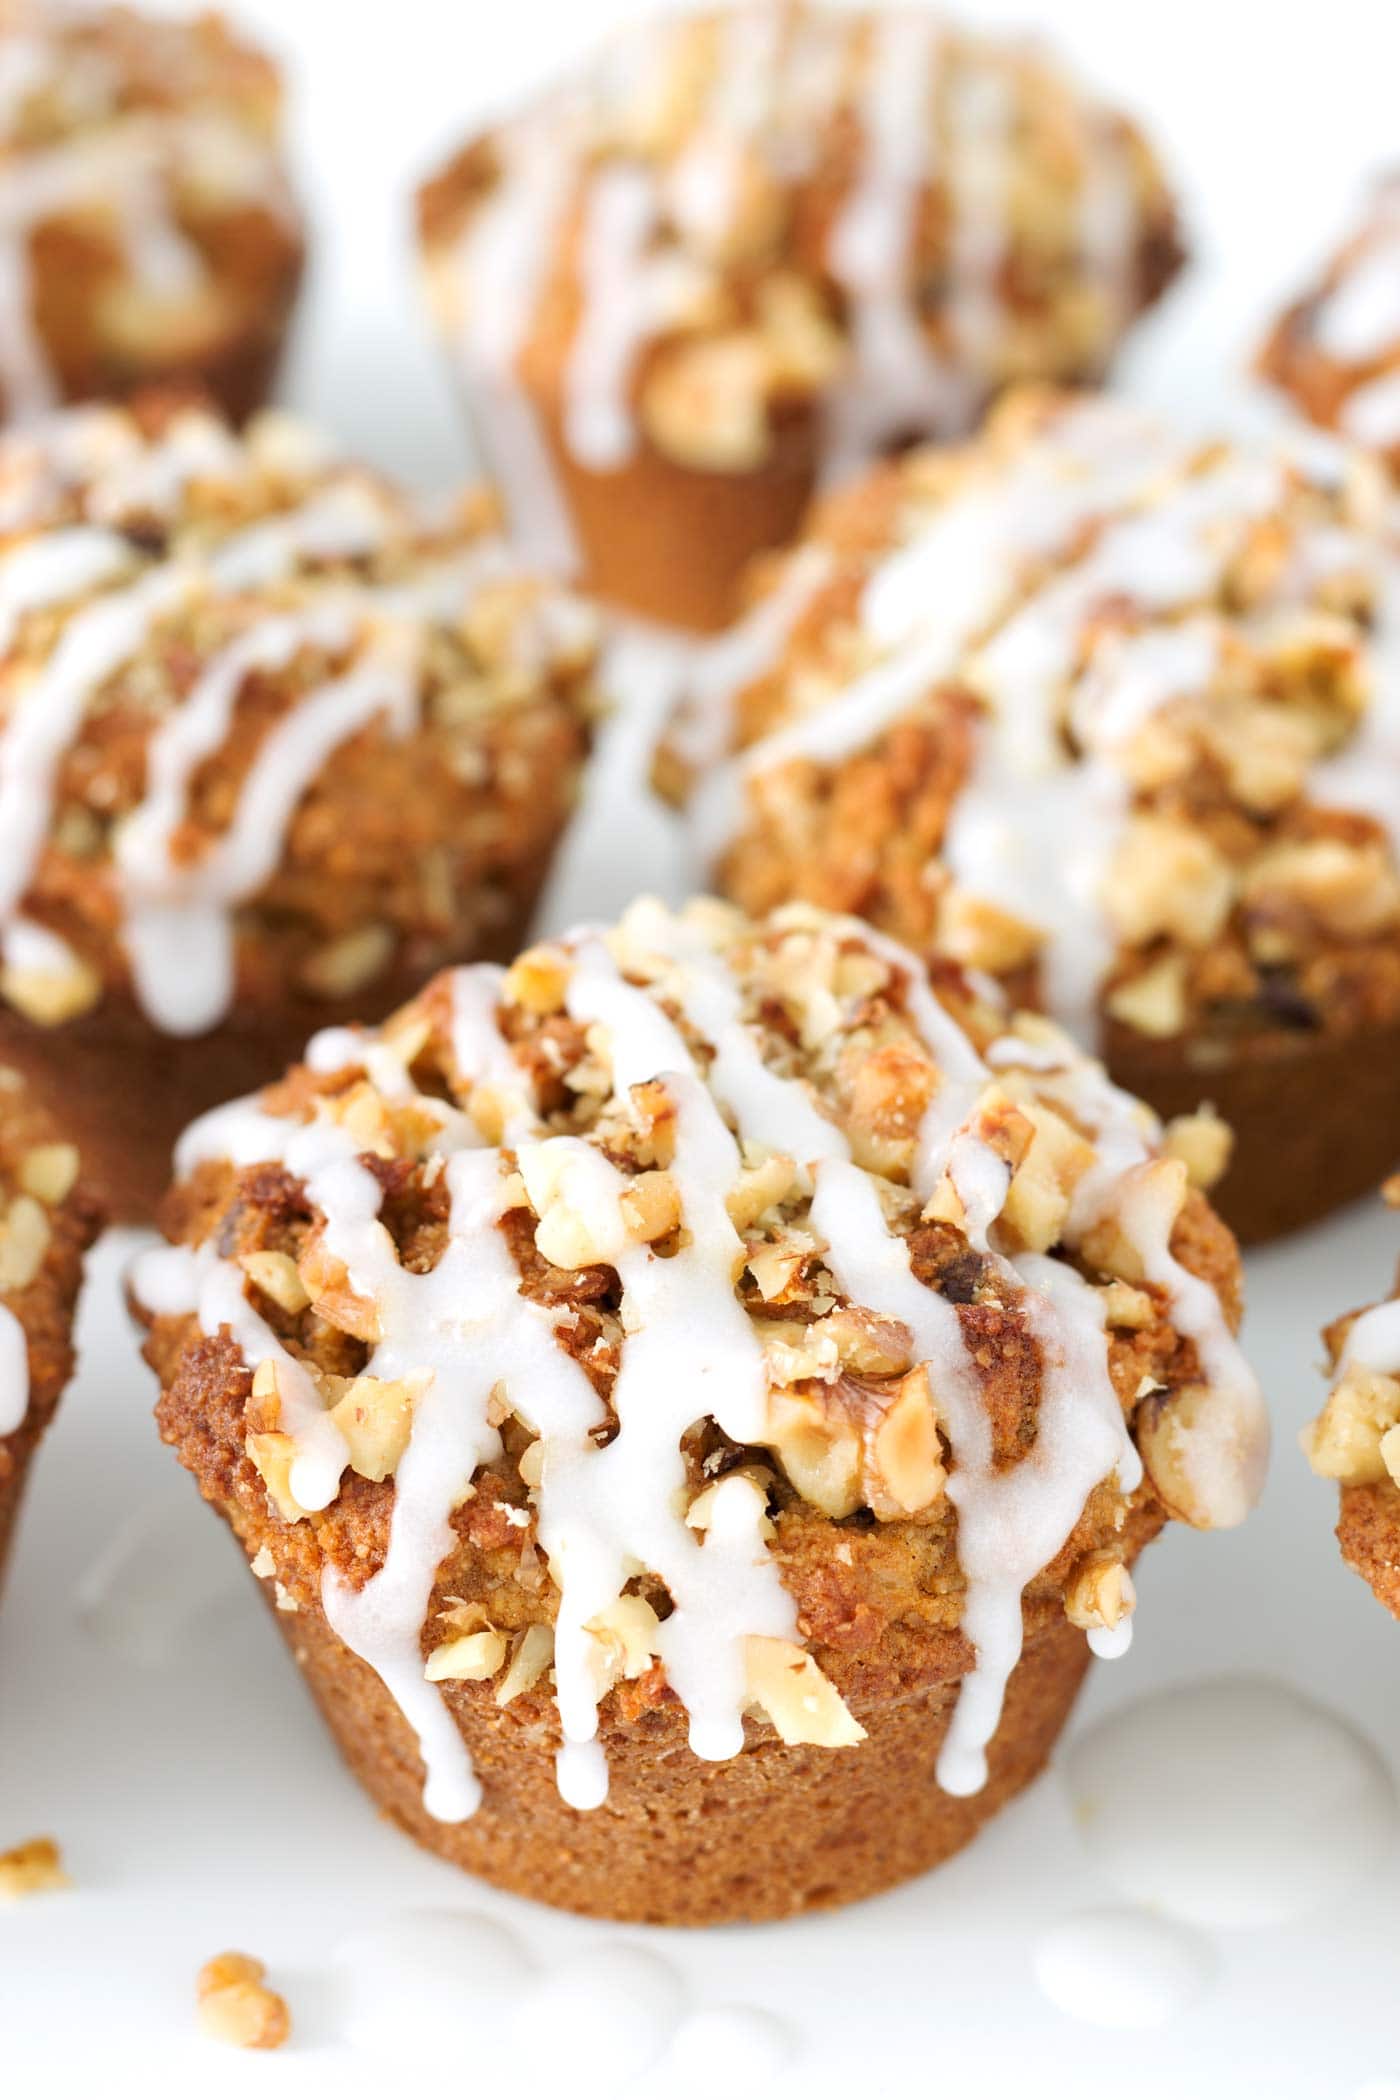 A seasonal favorite made healthy! These pumpkin chocolate chip muffins are easy to make, paleo, gluten free, and dairy free!